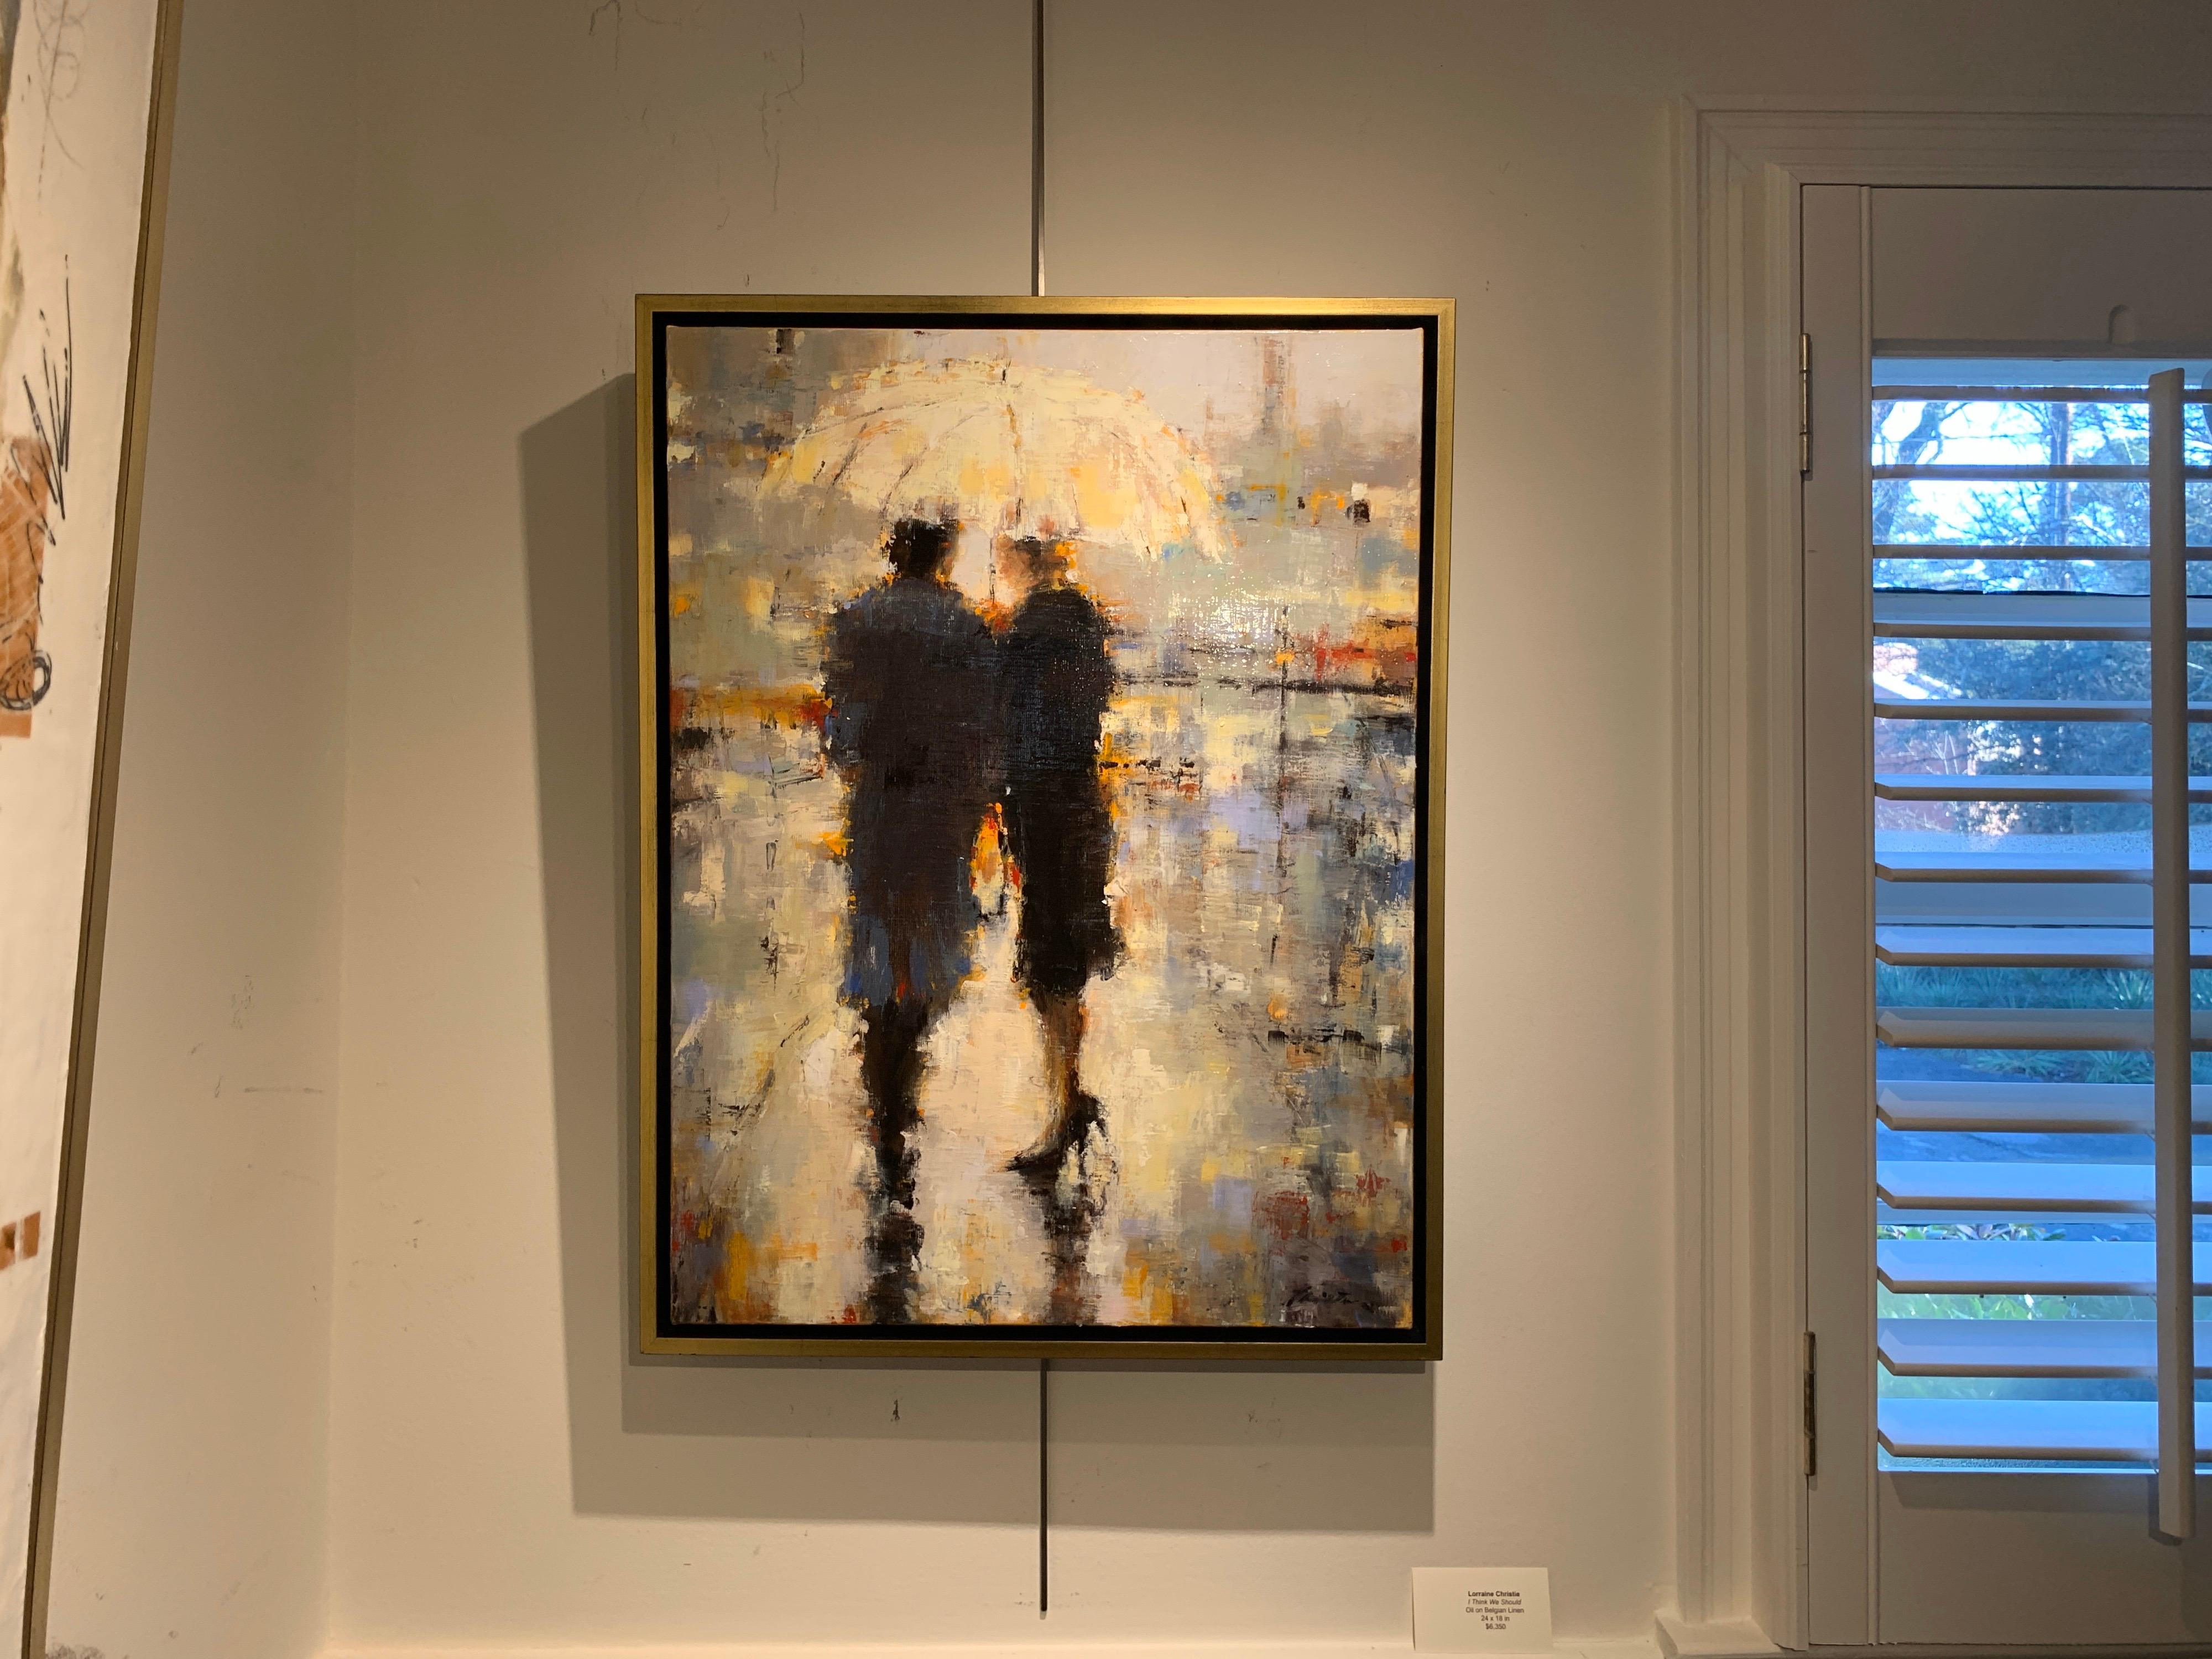 The unframed size of the canvas is 24 x 18.

Enigmatic and alluring. Evocative and romantic.  Emotional and powerful.  All words to describe Lorraine Christie’s masterful paintings that revolve around love, loss, lust and life’s daily communications